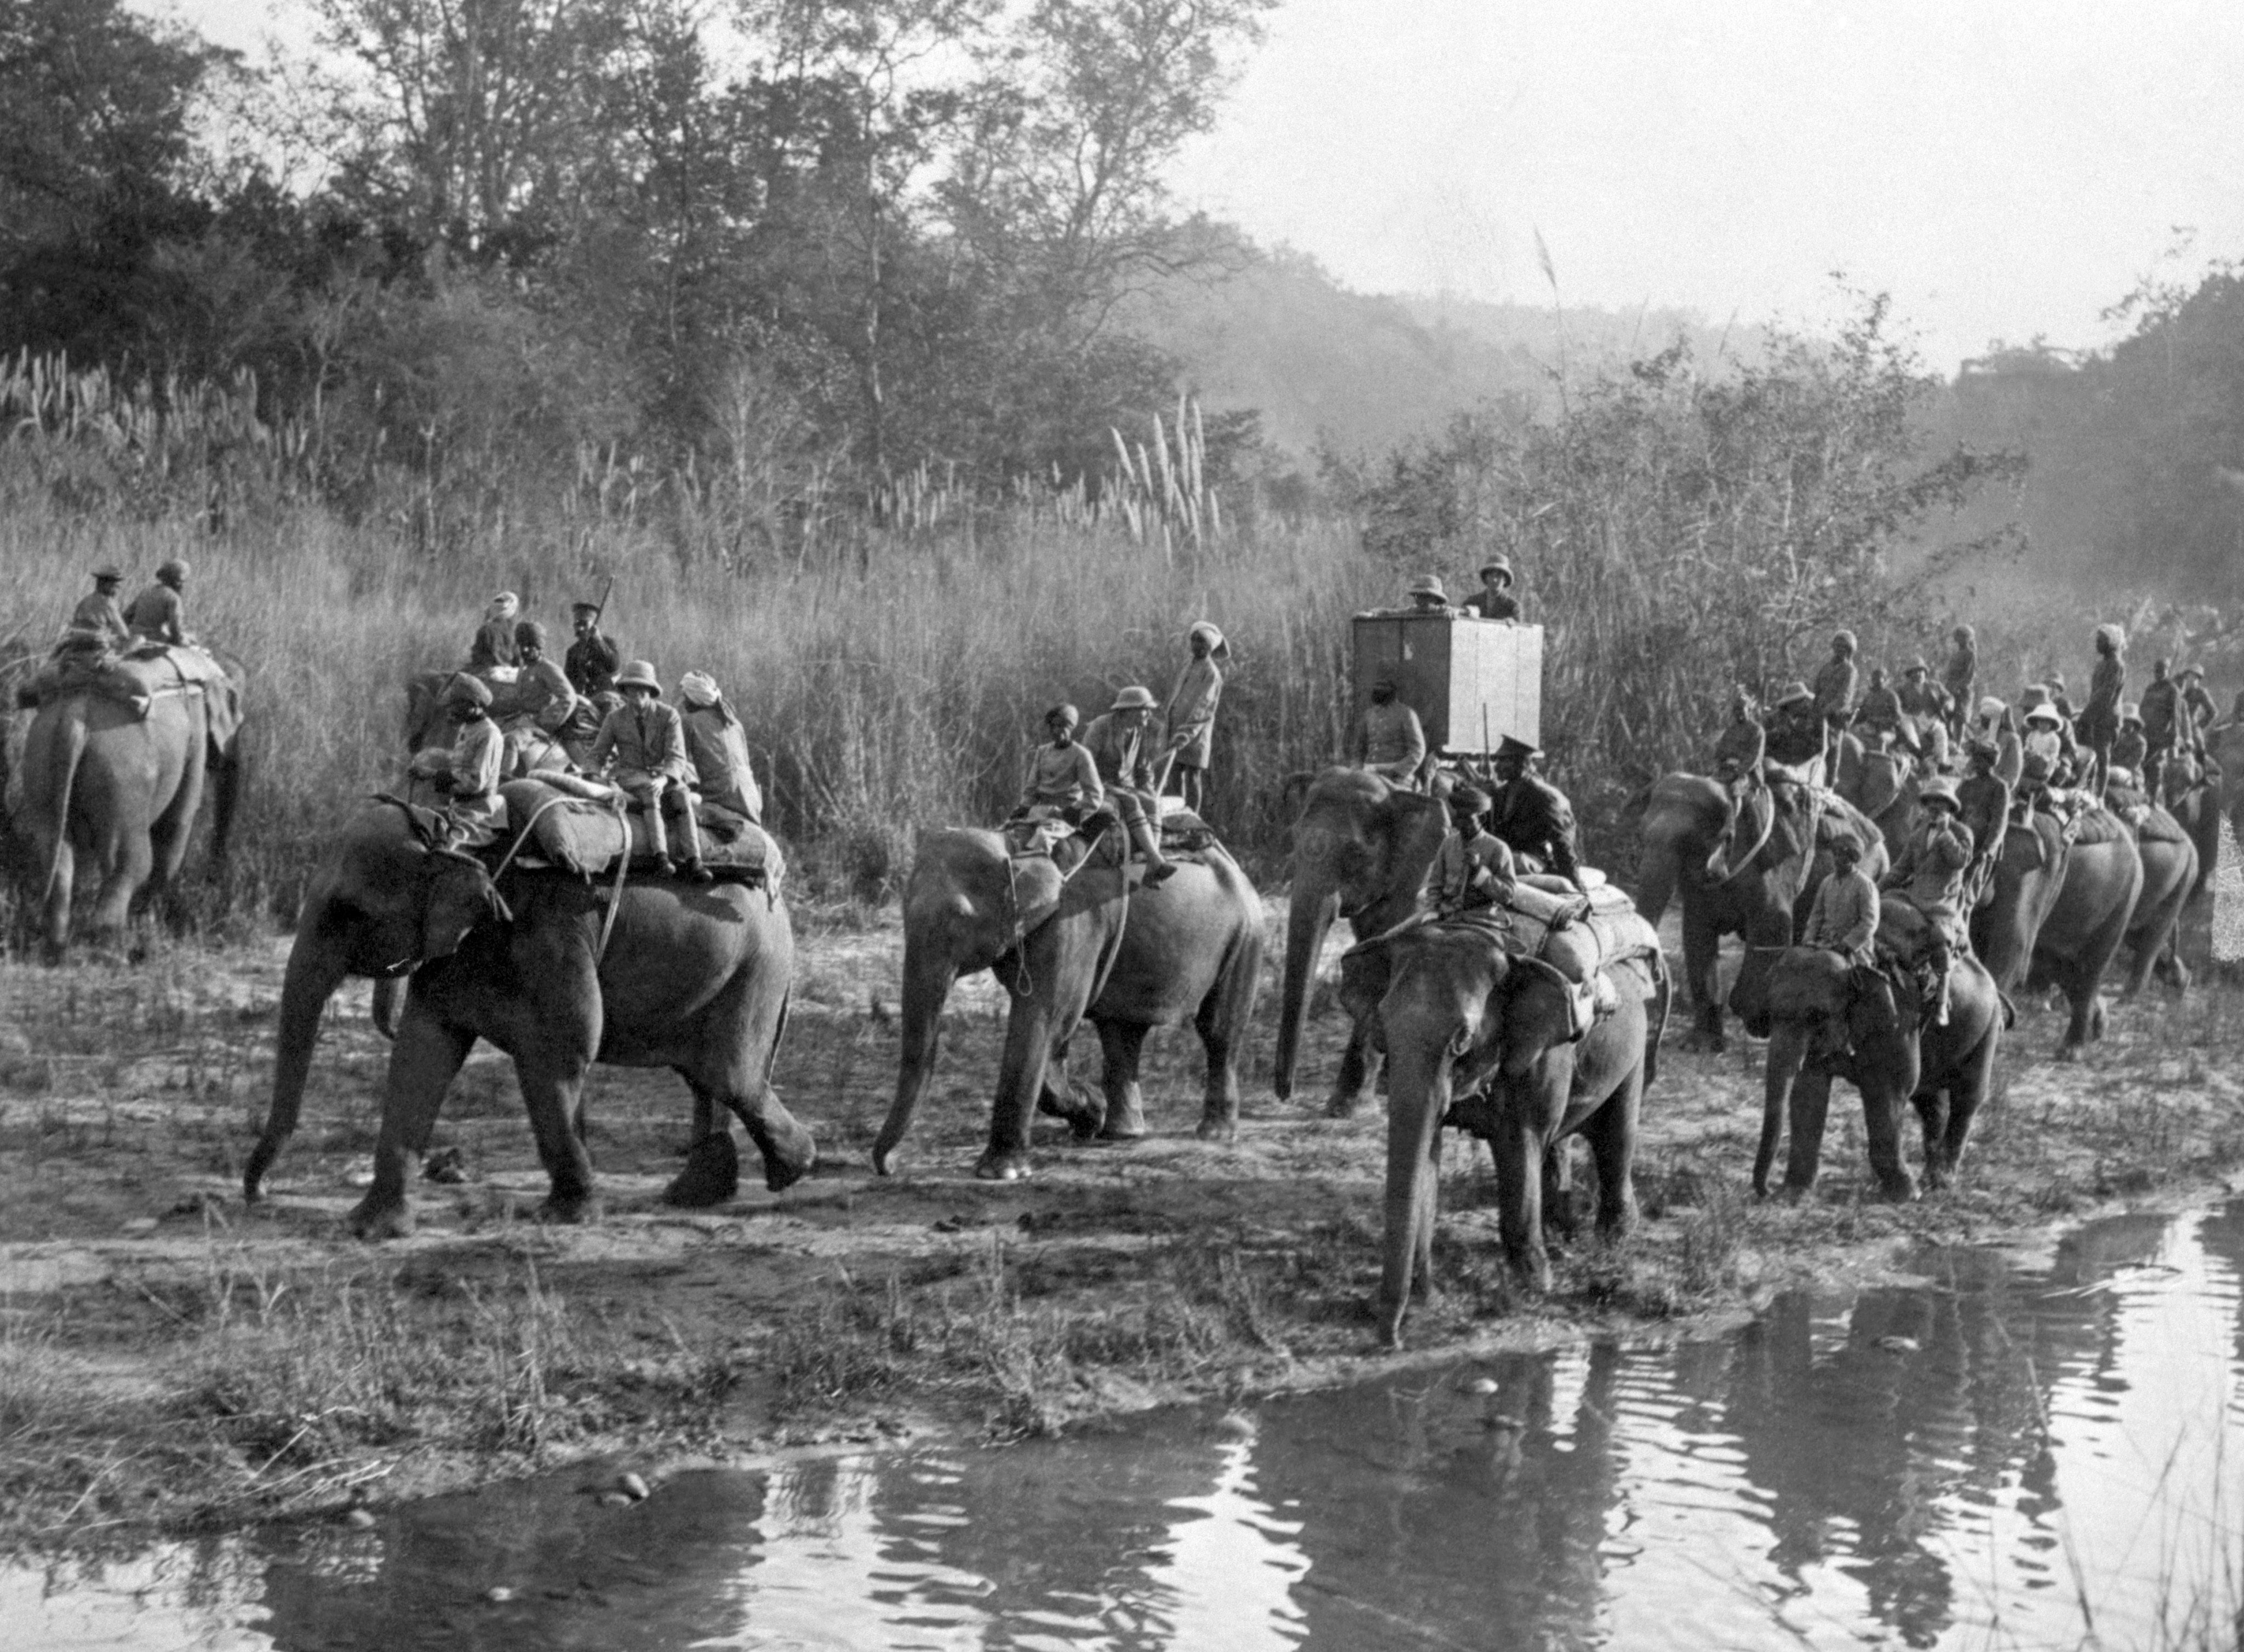 The prince rides an elephant on the way to a tiger shoot in Nepal